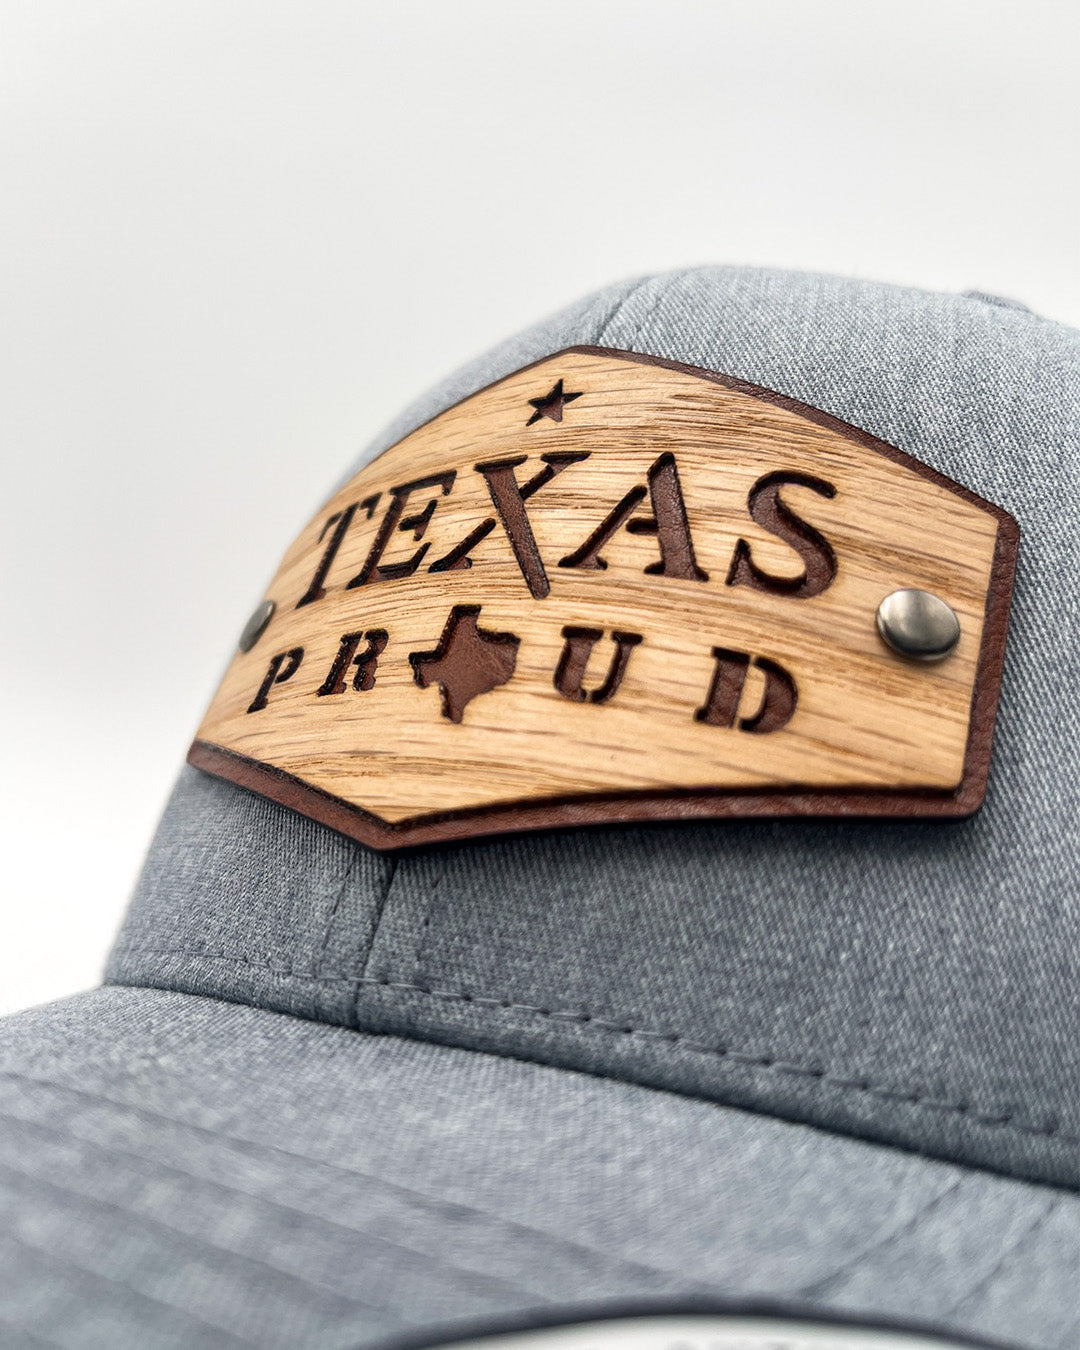 Affordable Custom Hats & Caps Black Texas Proud Edition Hat Real Wood Patch FlexFit Fitted Cap Cheap Custom Apparel Cheap Custom Hats Cheap Affordable Custom Hats & Caps